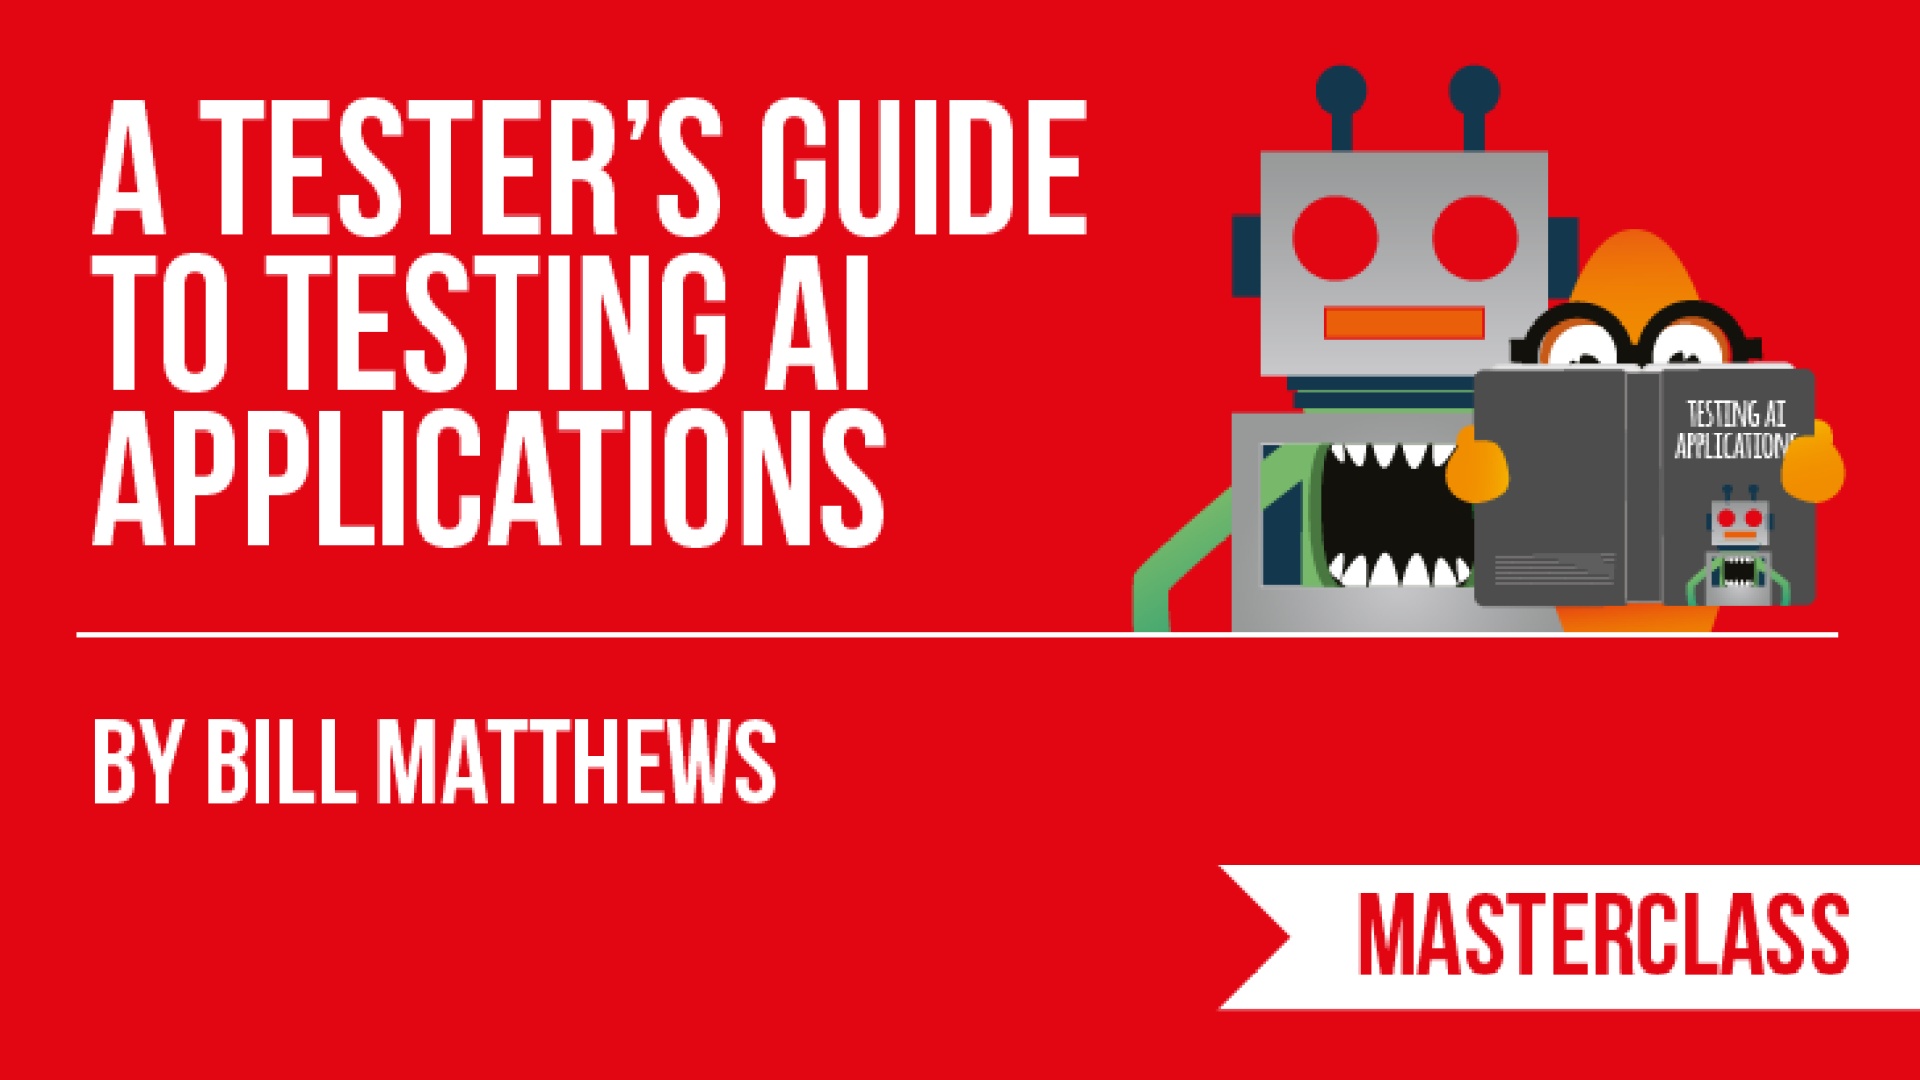 A Tester's Guide to Testing AI Applications